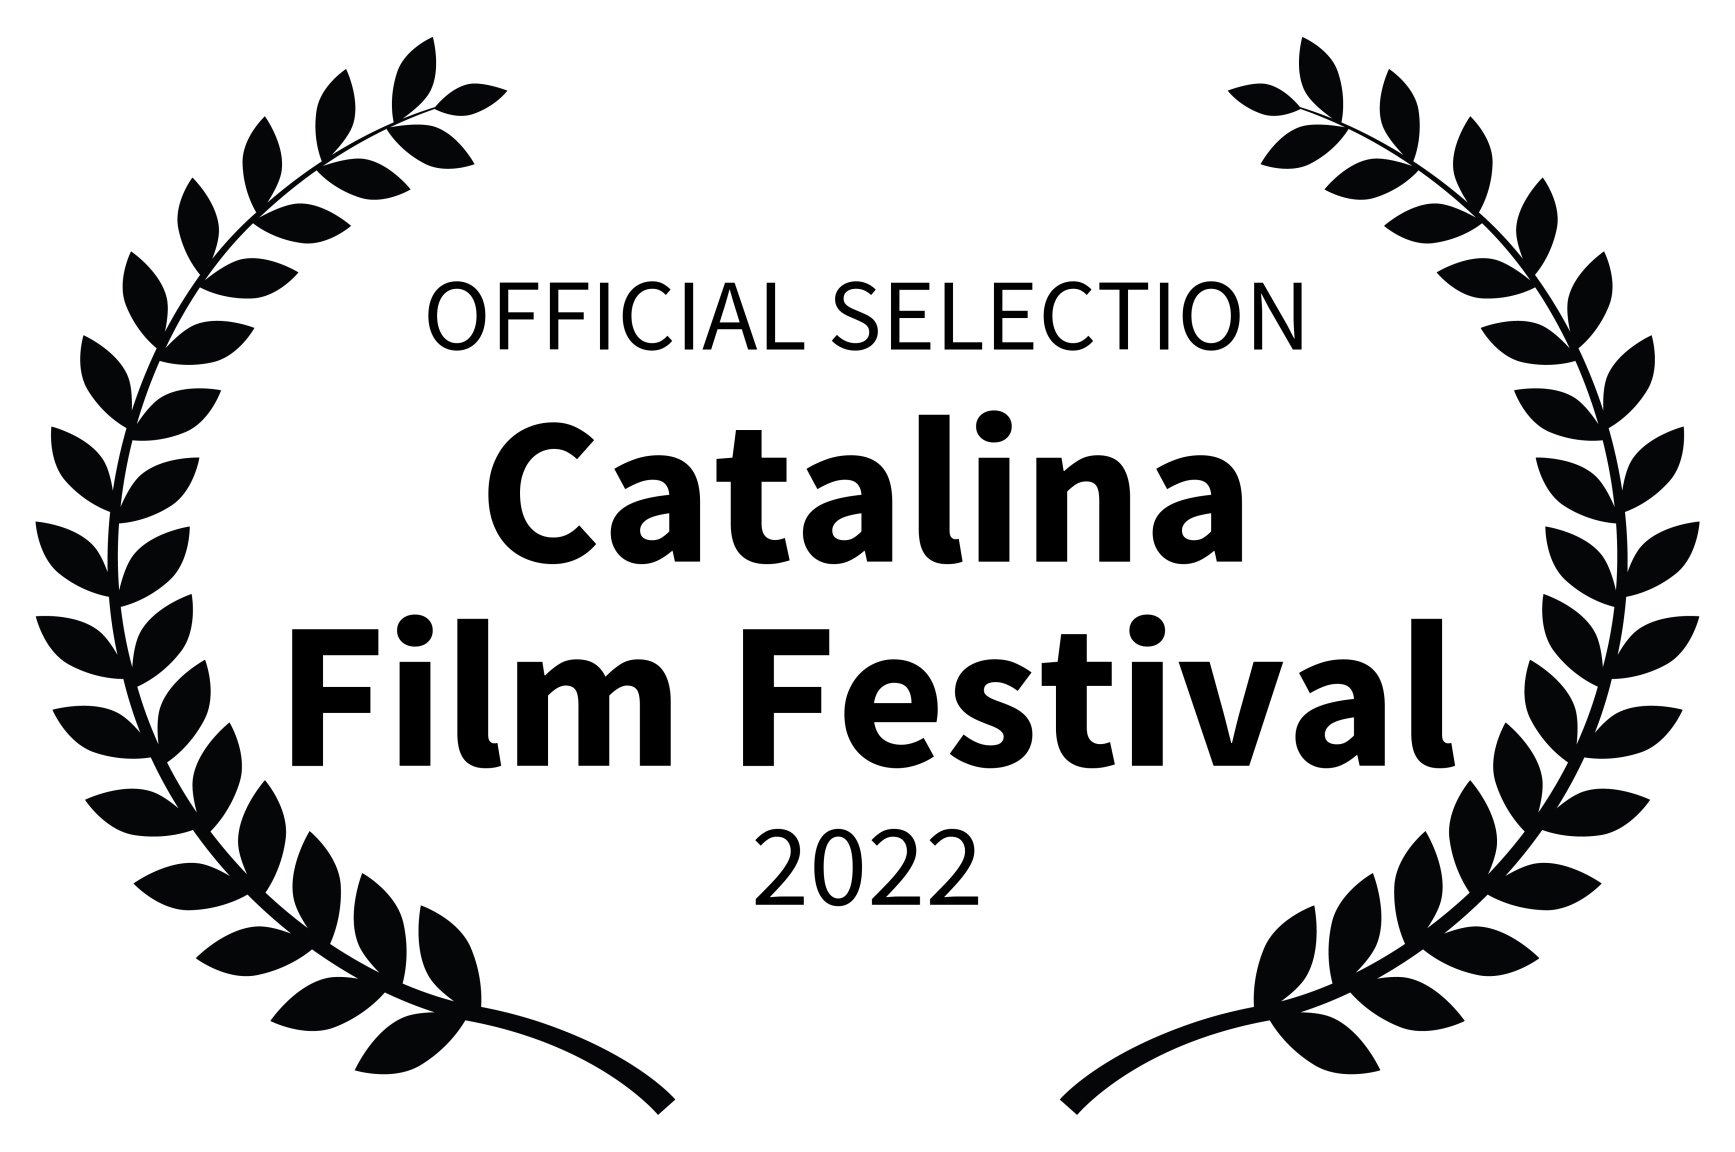 OFFICIAL SELECTION - Catalina Film Festival - 2022.jpg